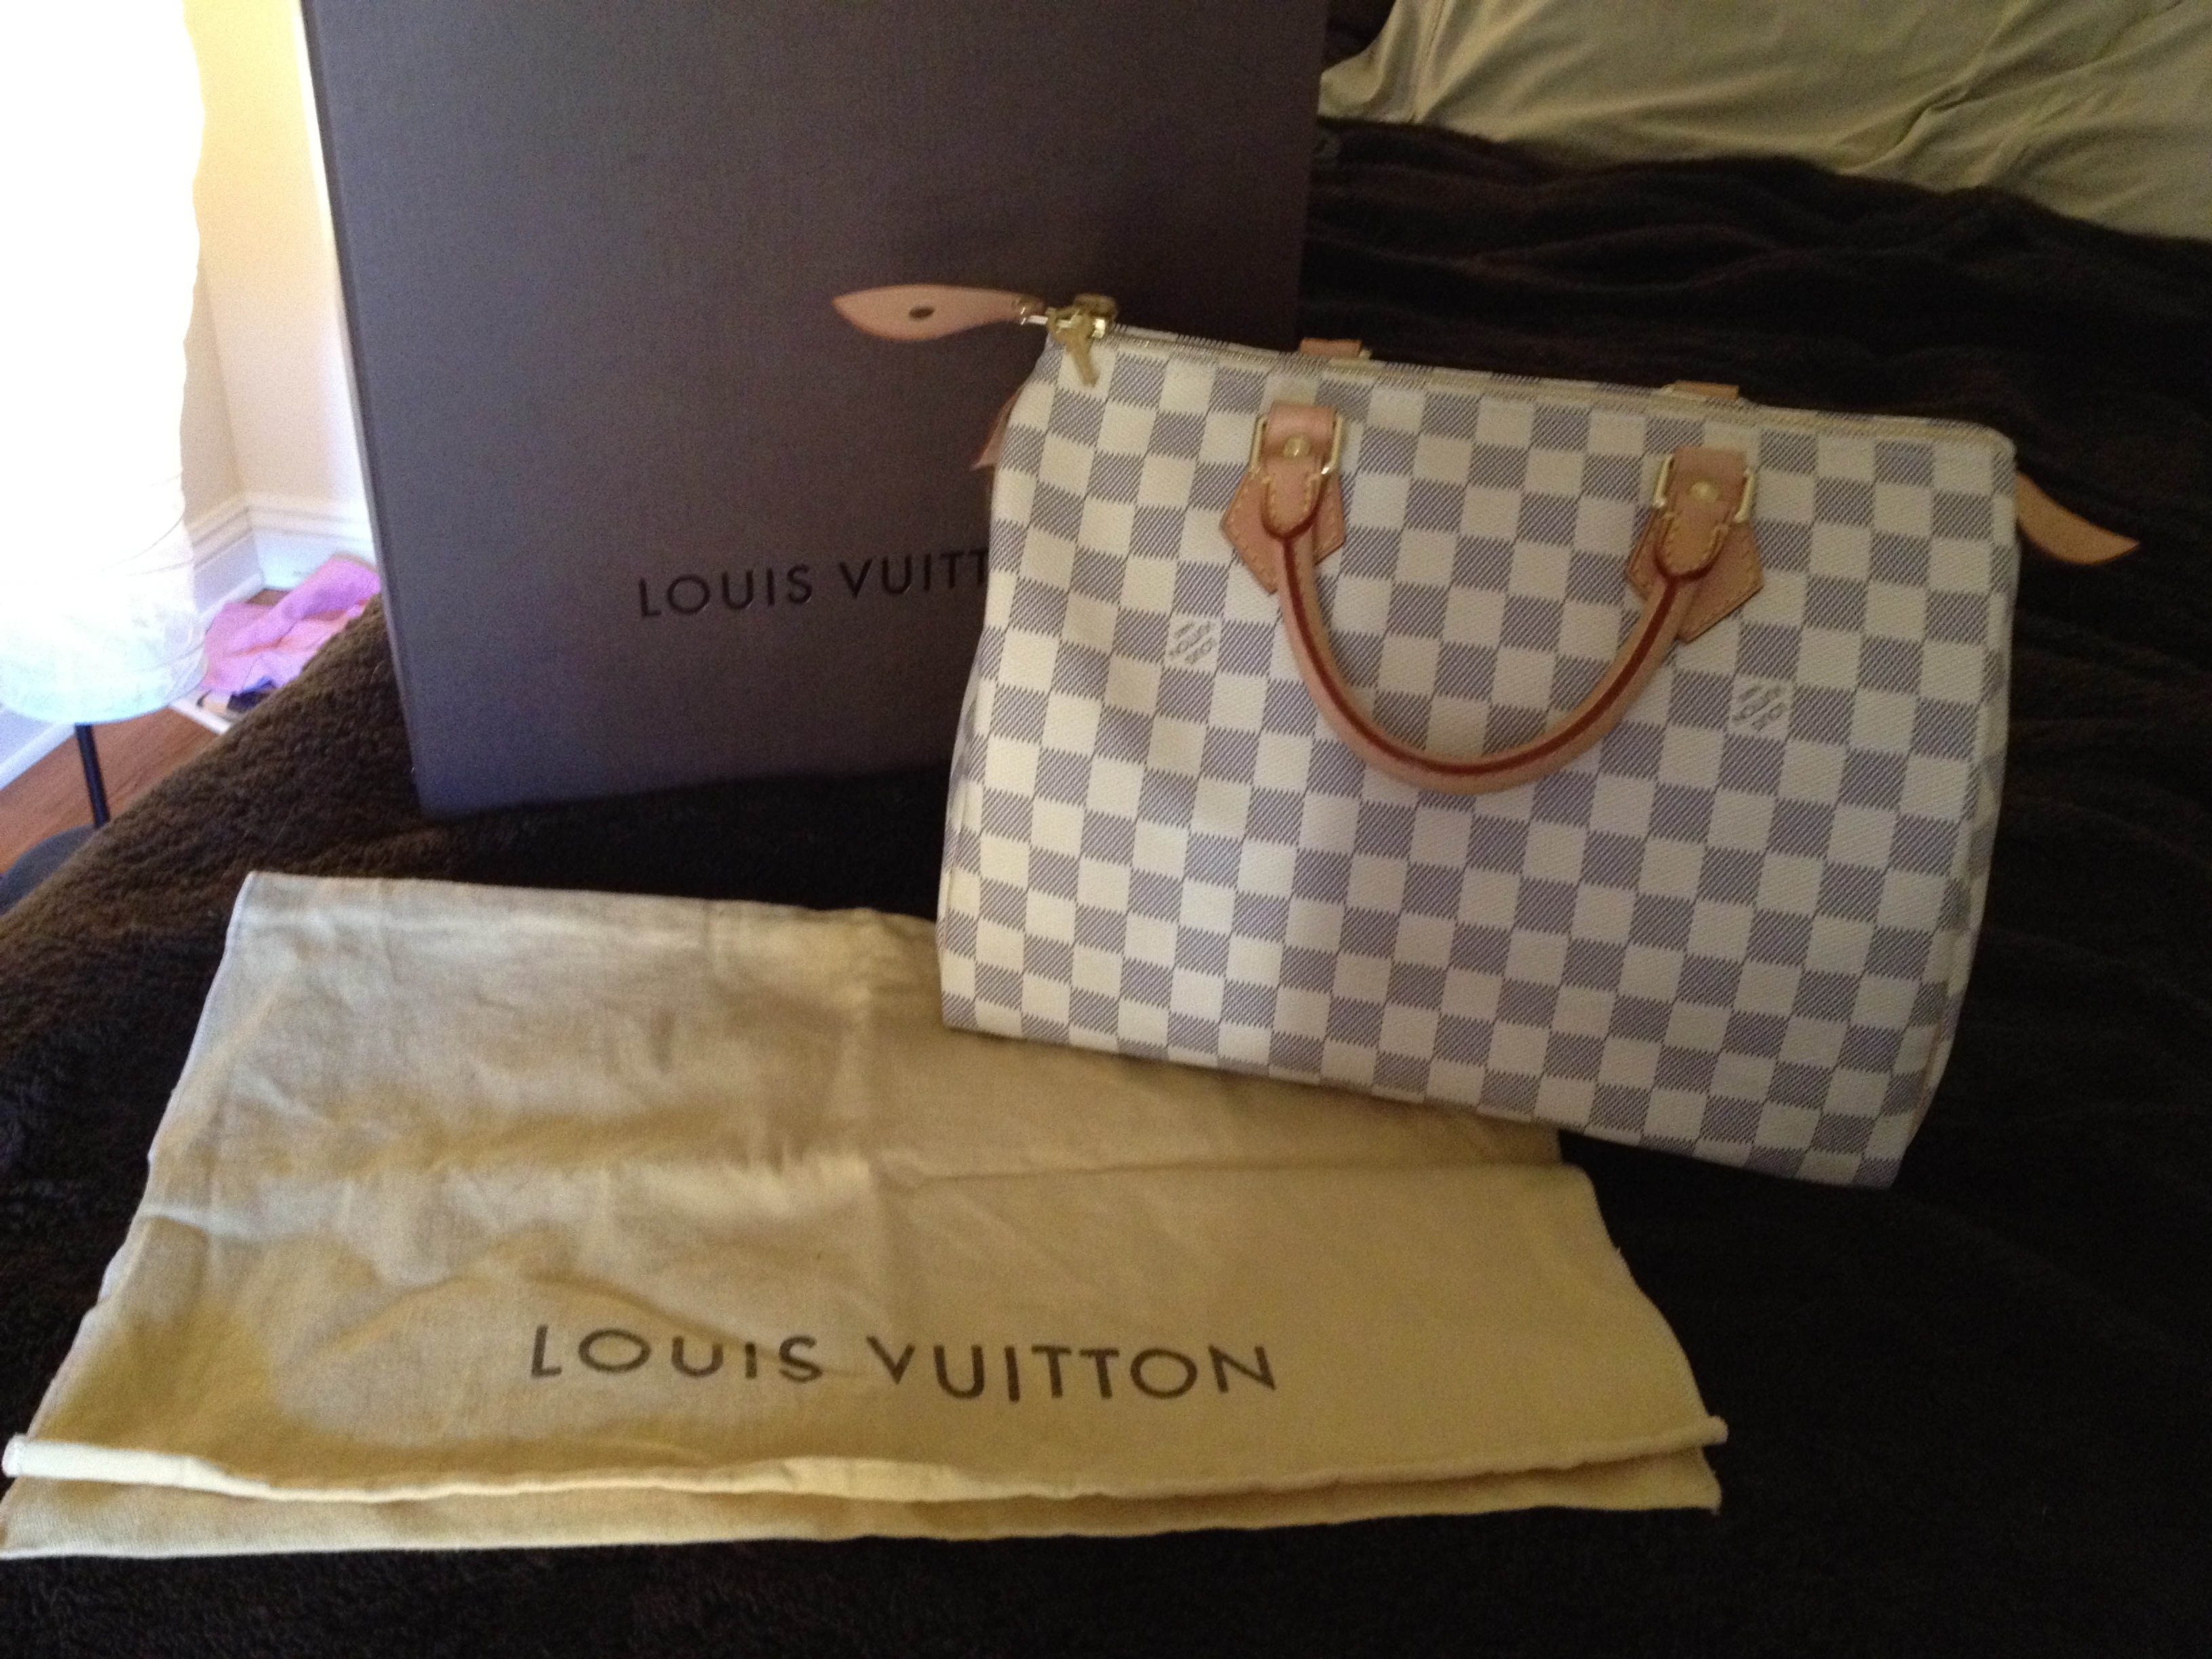 Does Louis Vuitton offer site-wide free shipping? — Knoji